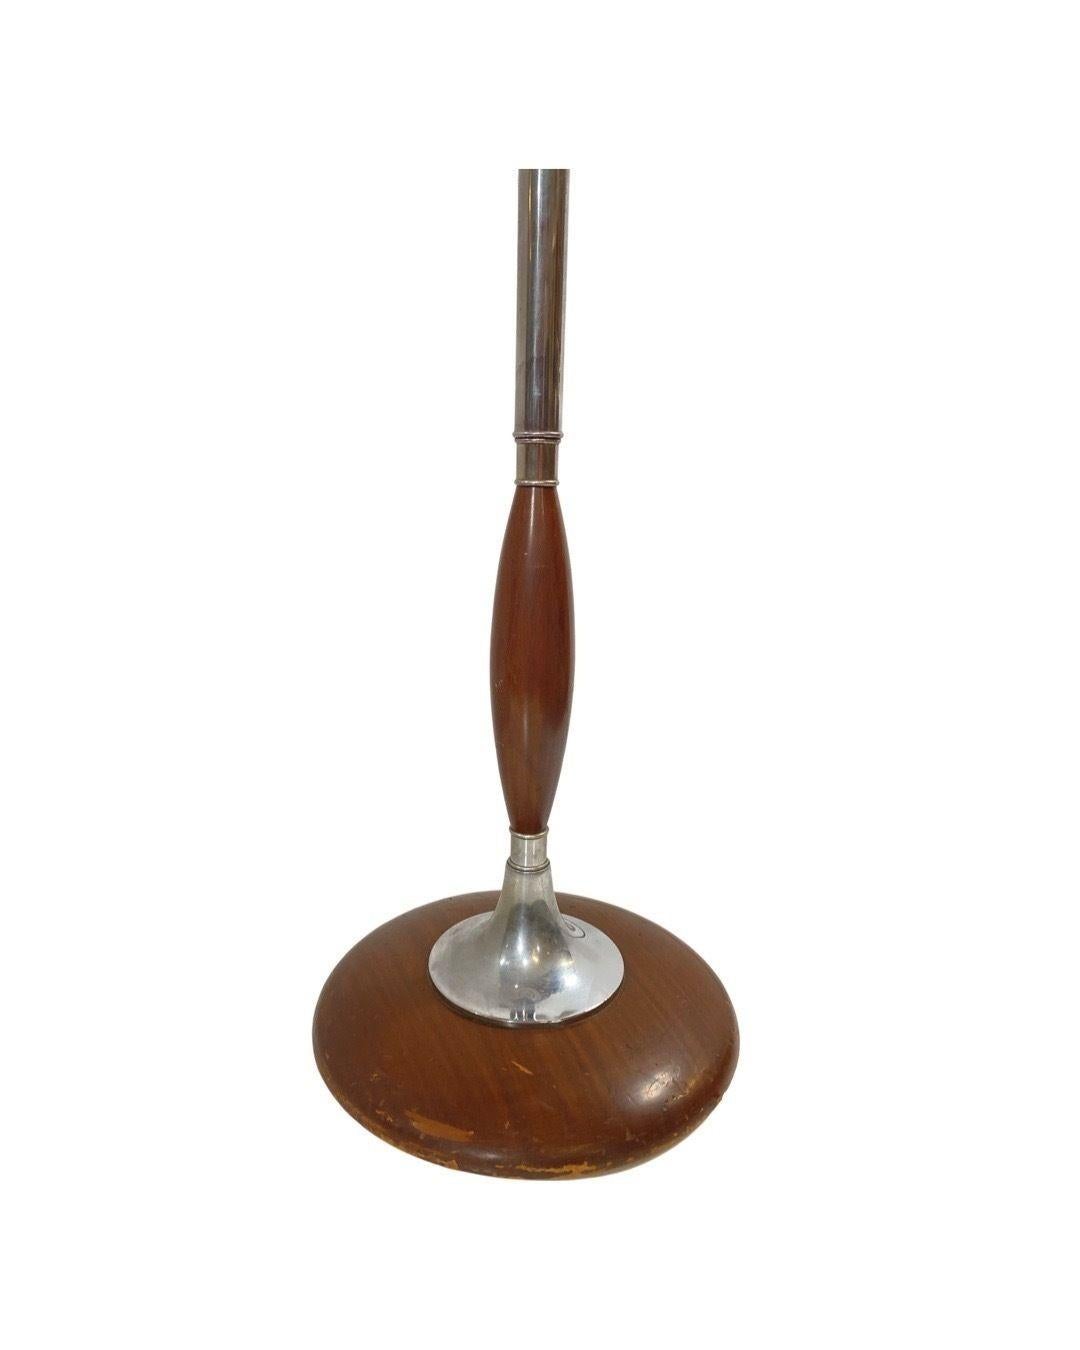 American Art Moderne Wood and Chrome Swing Arm Floor Lamp For Sale